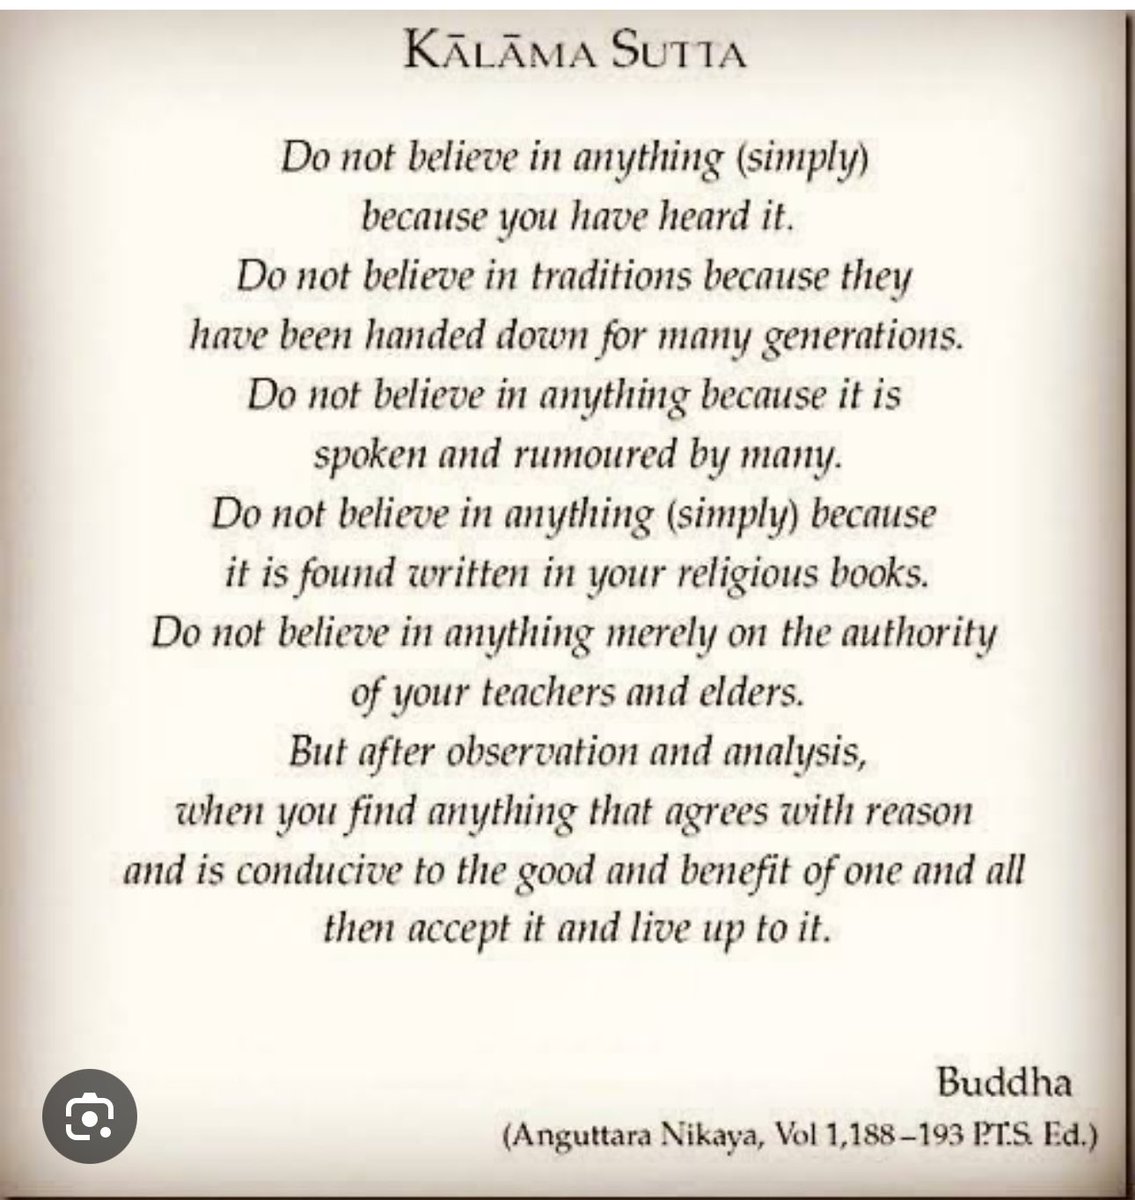 Subject everything to scrutiny. No dogmas. No blind beliefs. 
That’s what the Buddha preached all his life and lived upto it. Is there any other religious founder who threw everything they taught open to such scrutiny ? 
#Rationality